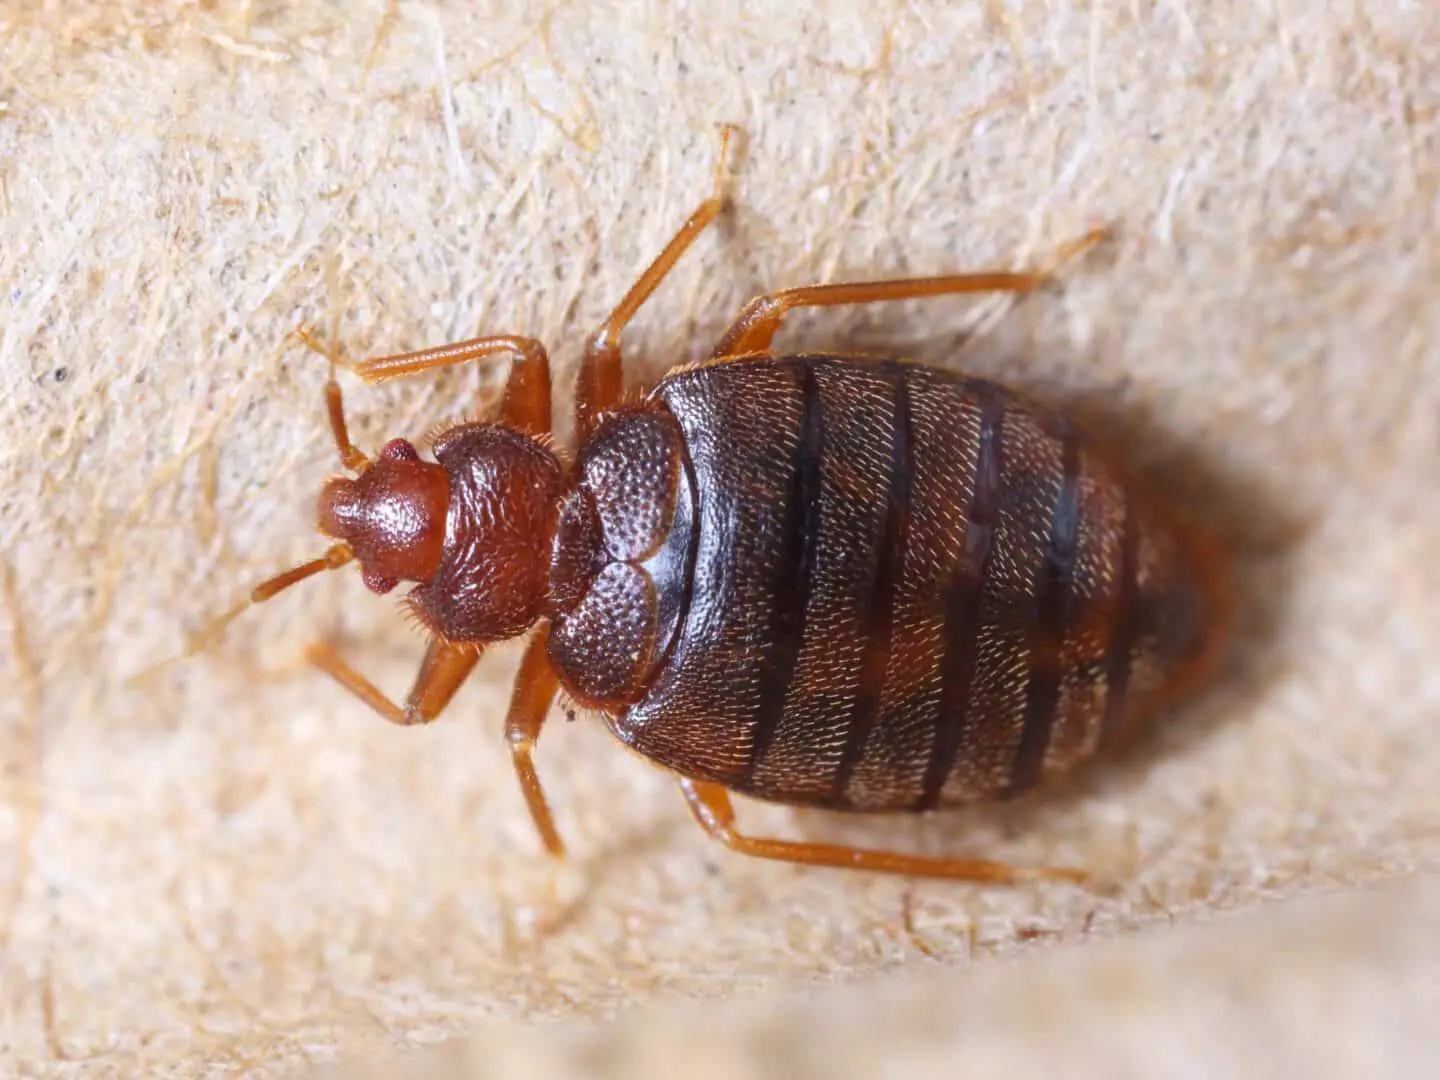 Cimex Lectularius: Common Bed Bug - All There is to Know